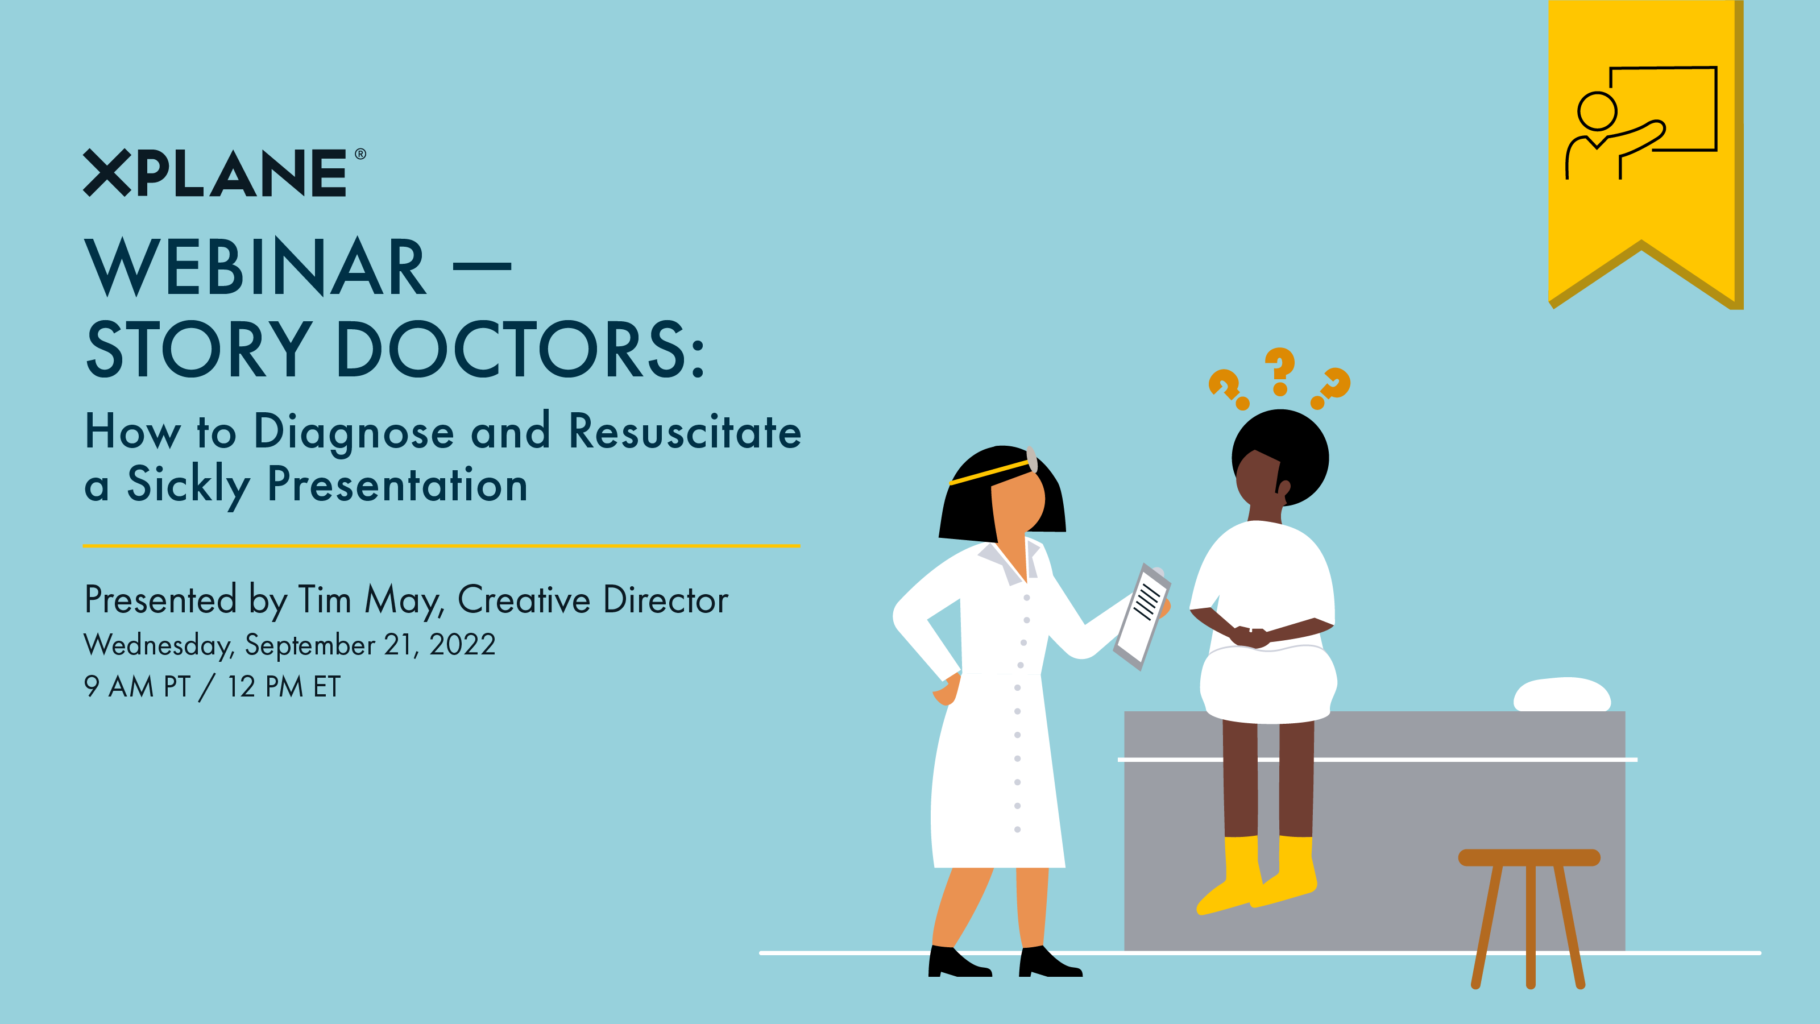 On the right, a doctor holding a clipboard stands in front of a patient sitting on a bed with question marks above their head. On the left text reads, “Webinar — Story Doctors: How to Diagnose and Resuscitate a Sickly Presentation. Presented by Tim May. Wednesday September 21, 2022. 9am PT / 12pm ET." A yellow tag with an icon of a person presenting indicates that there's no recording of this webinar available.